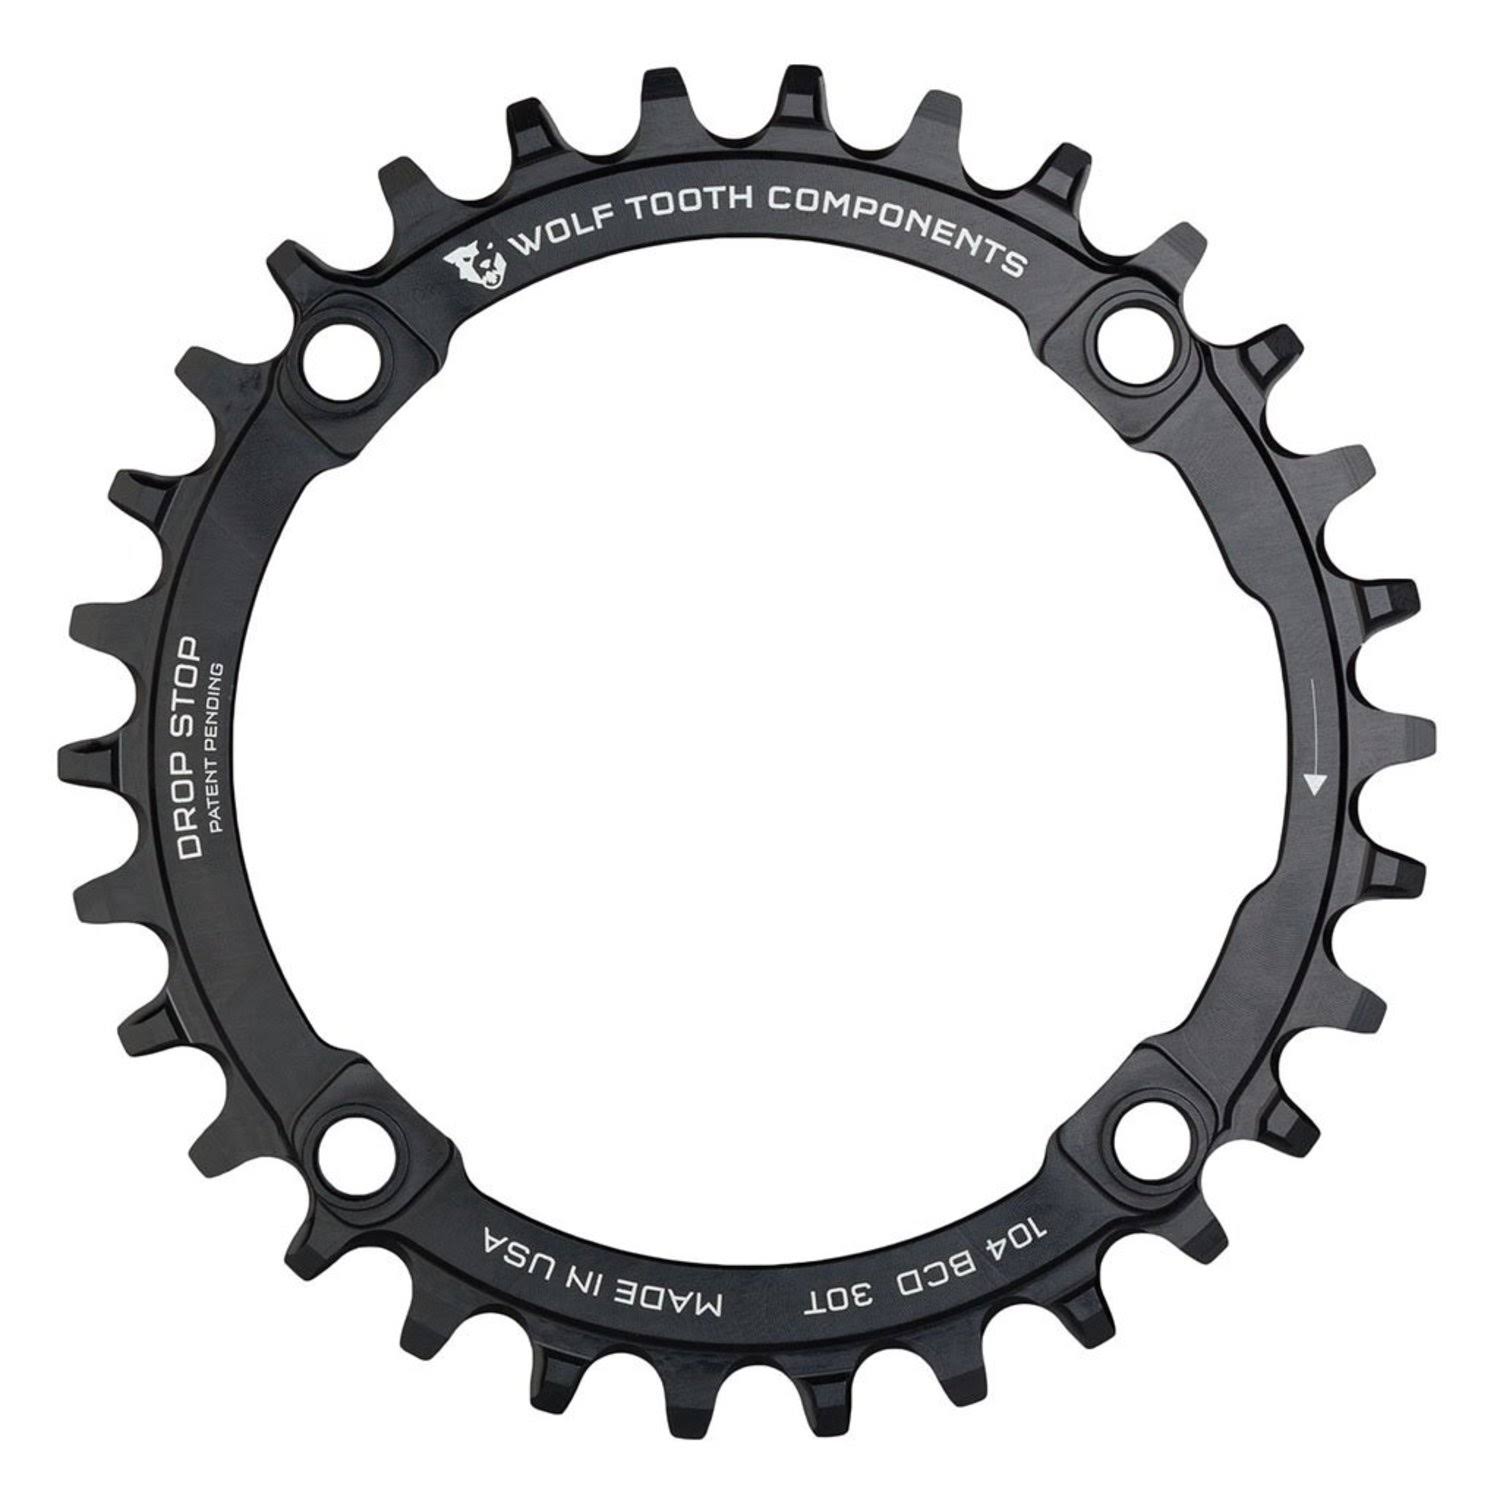 Wolf Tooth Components Drop-Stop Chainring - Black, 34T